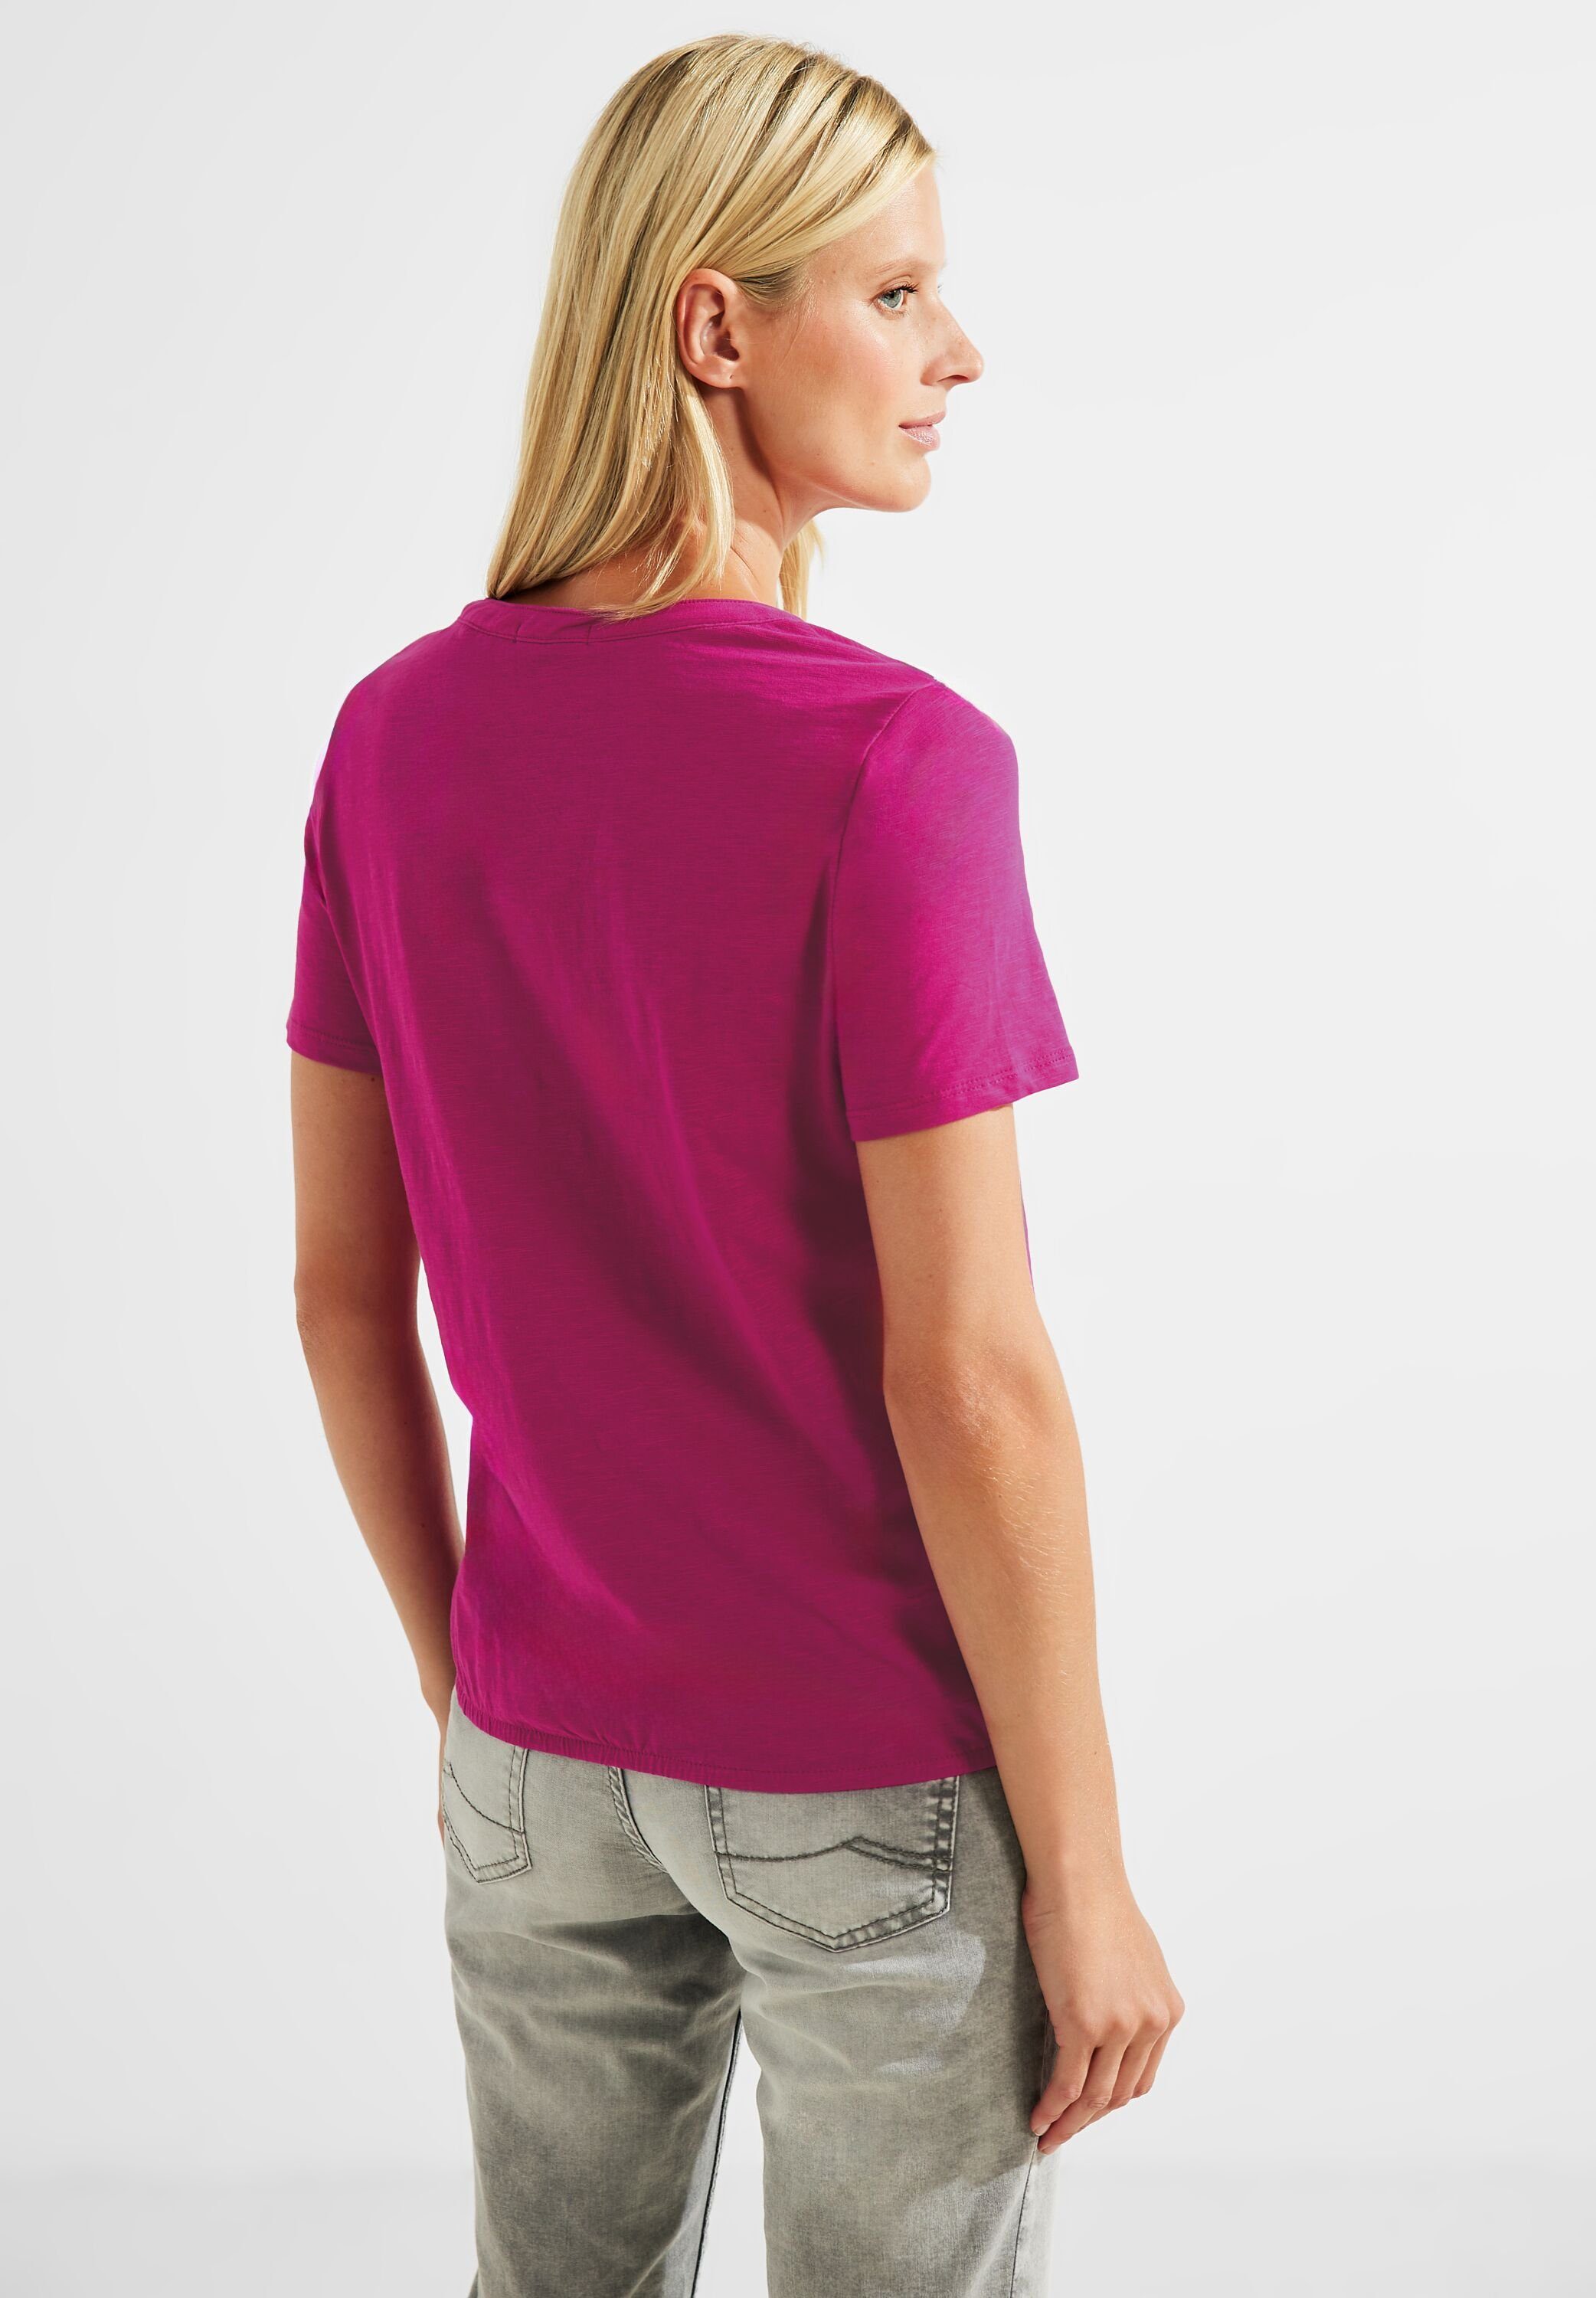 Cecil T-Shirt im pink cool Basic-Style